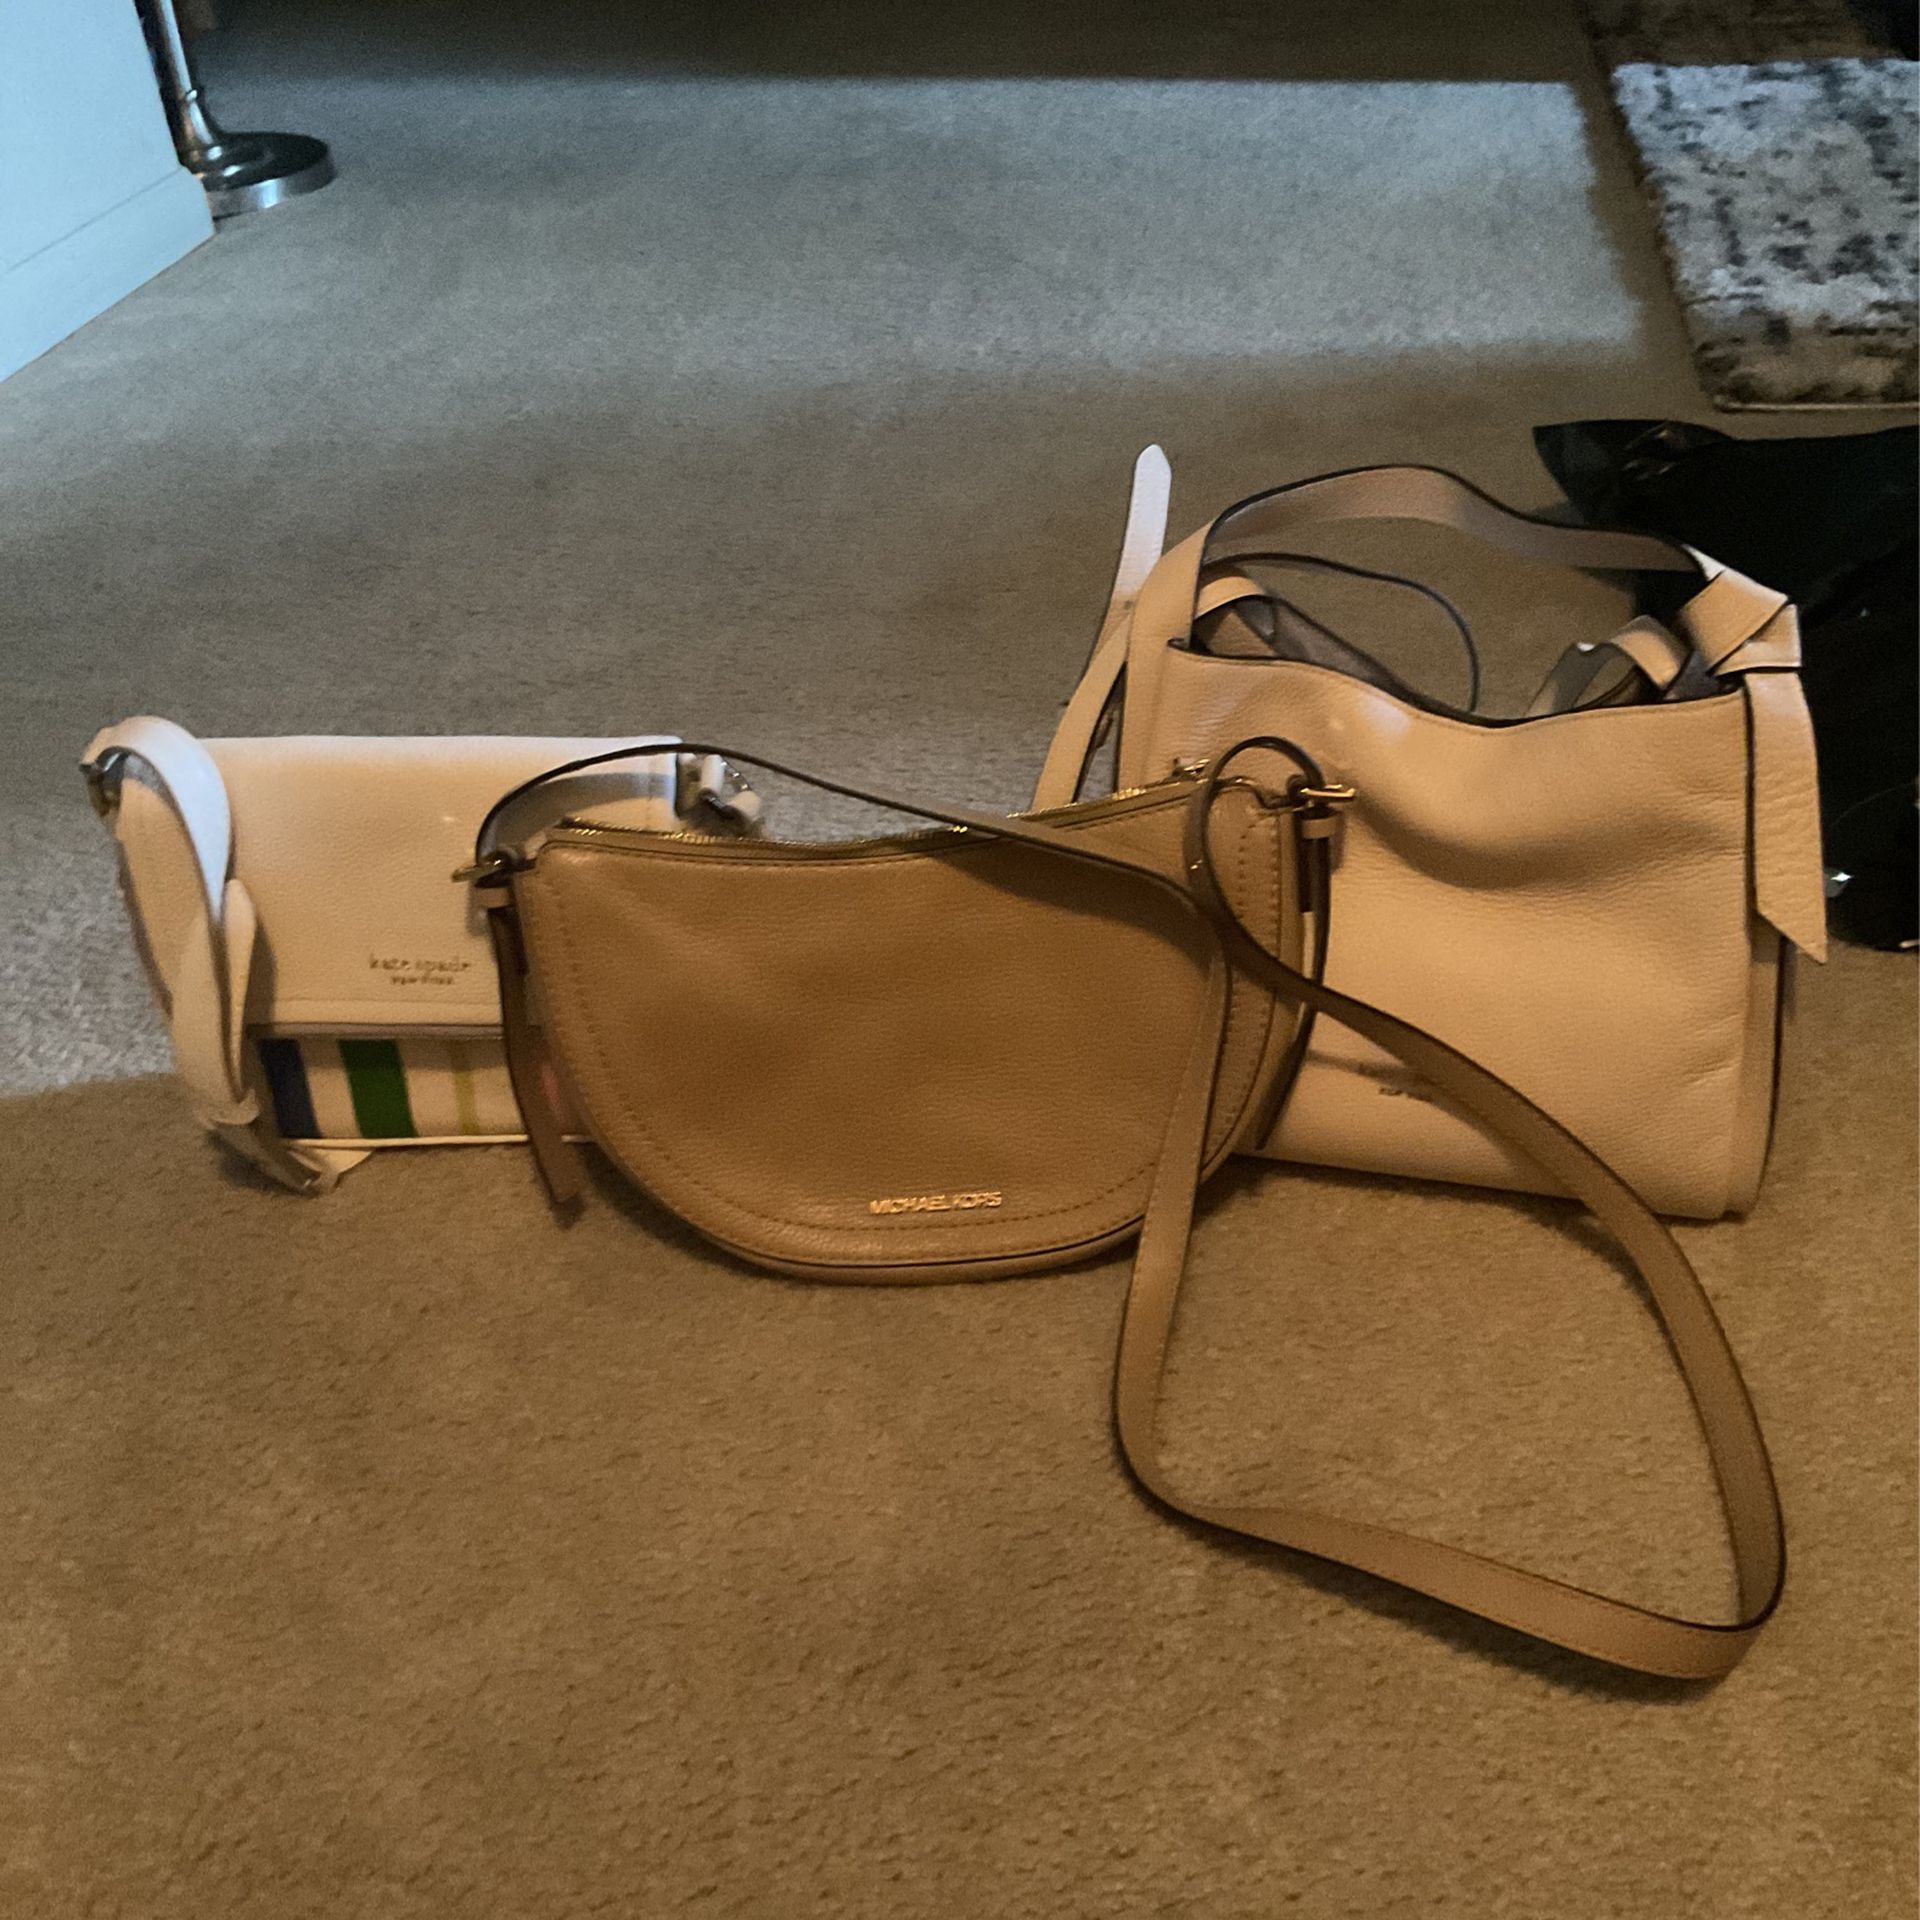 Kate spade Carson Convertible crossbody for Sale in San Diego, CA - OfferUp